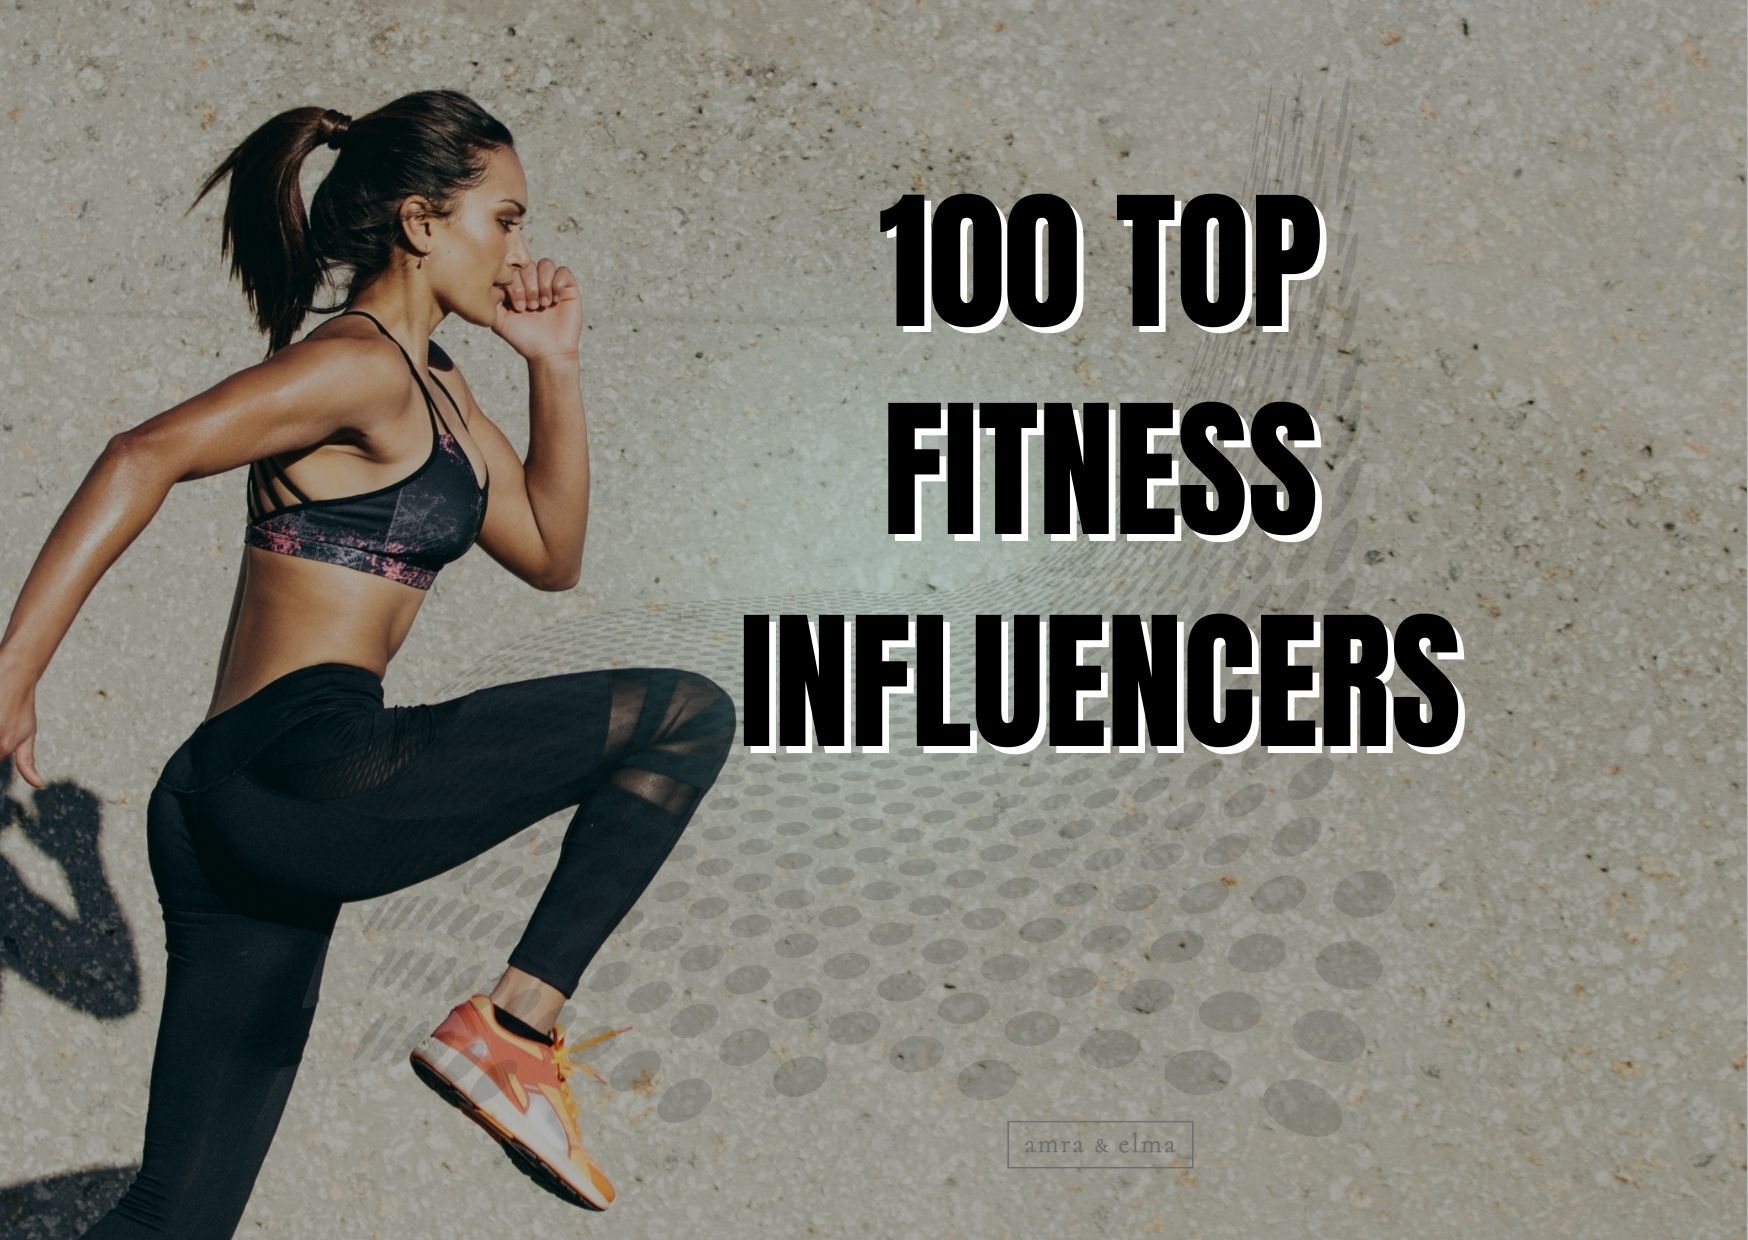 100 TOP FITNESS INFLUENCERS IN 2020